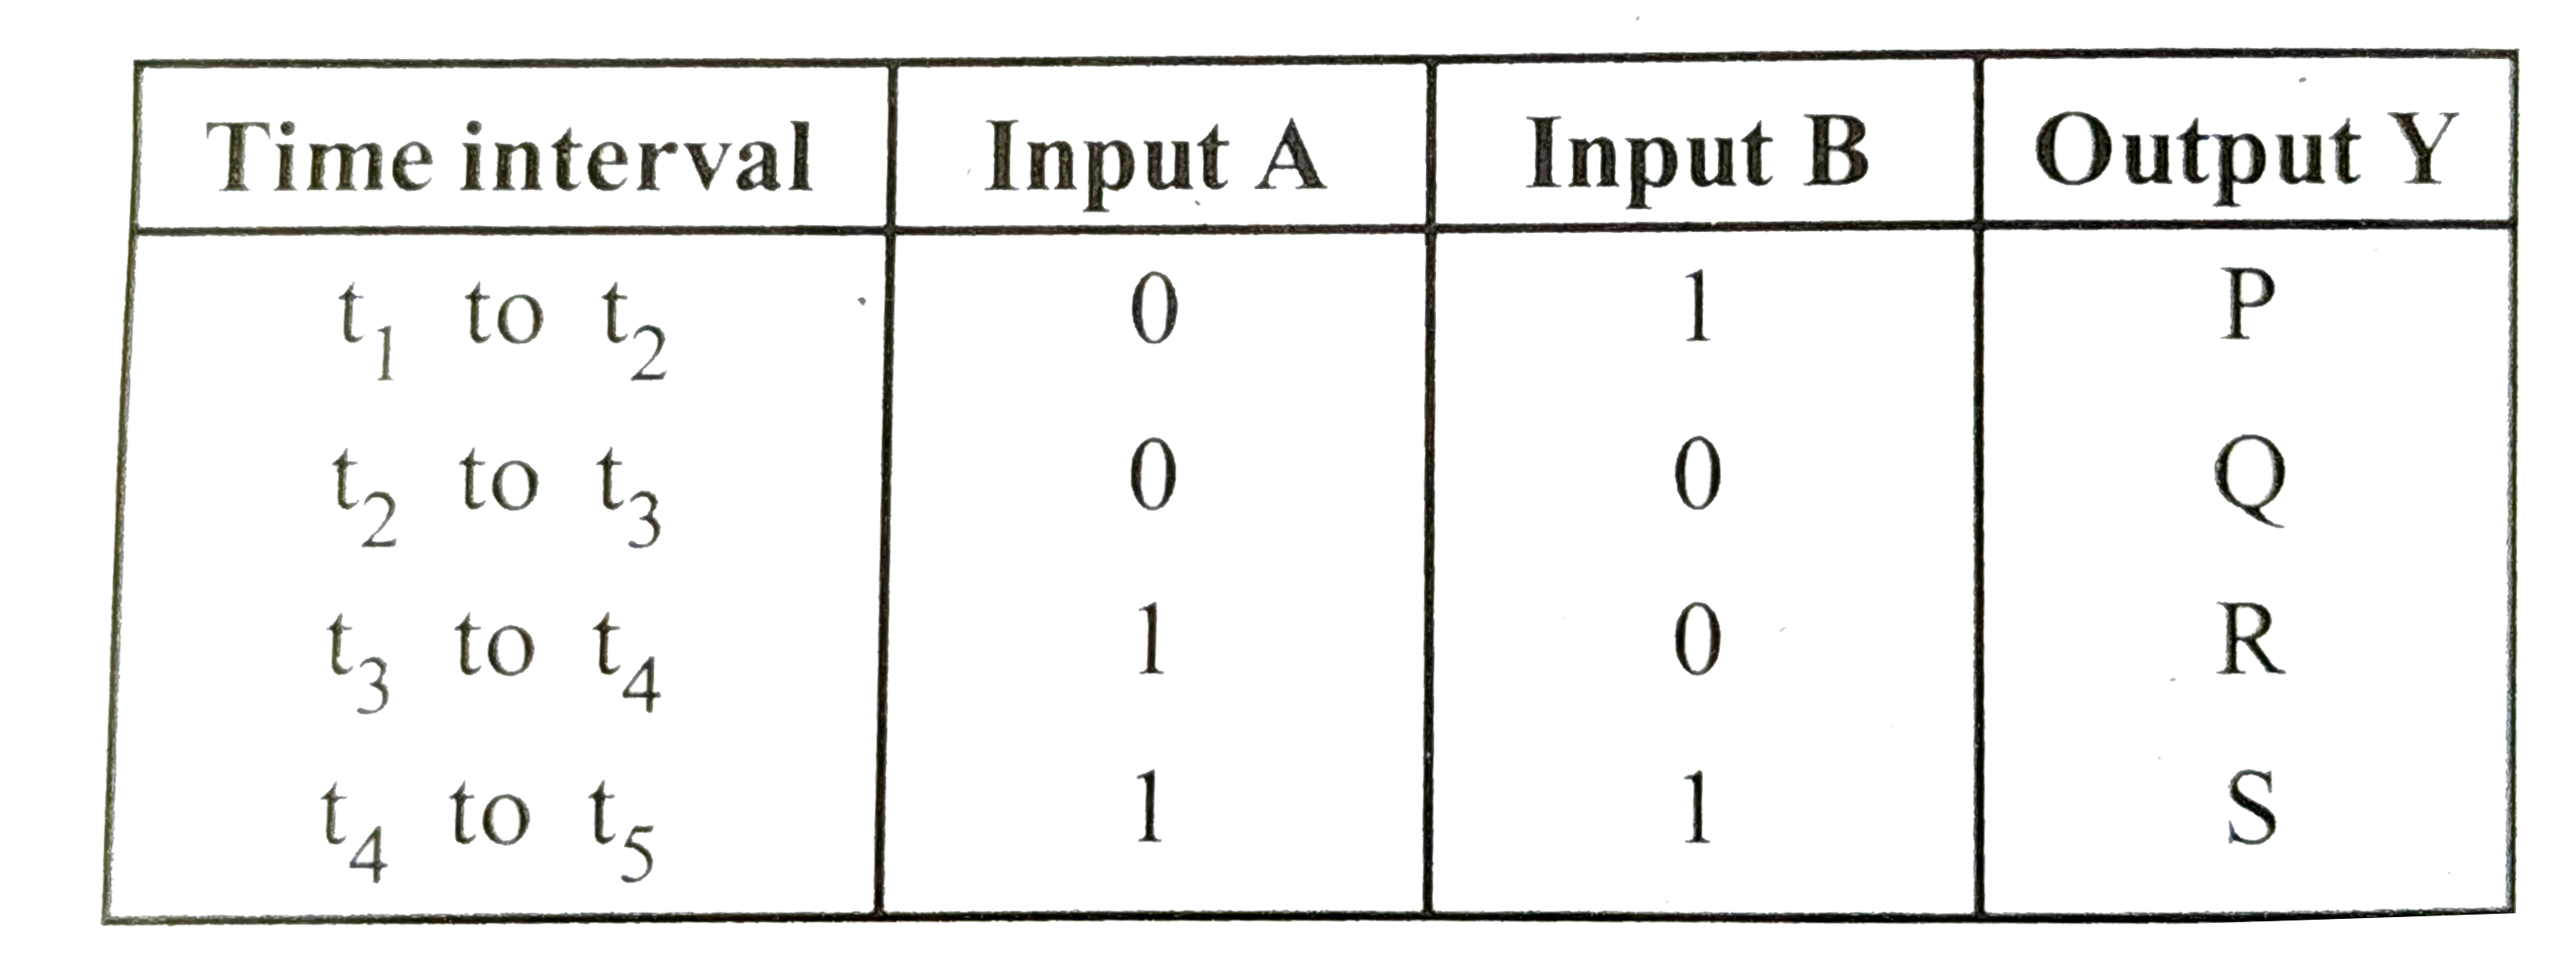 For a NAND gate the inputs and outputs for different time invervals are given below :      The values taken by P,Q,R,S are respectively